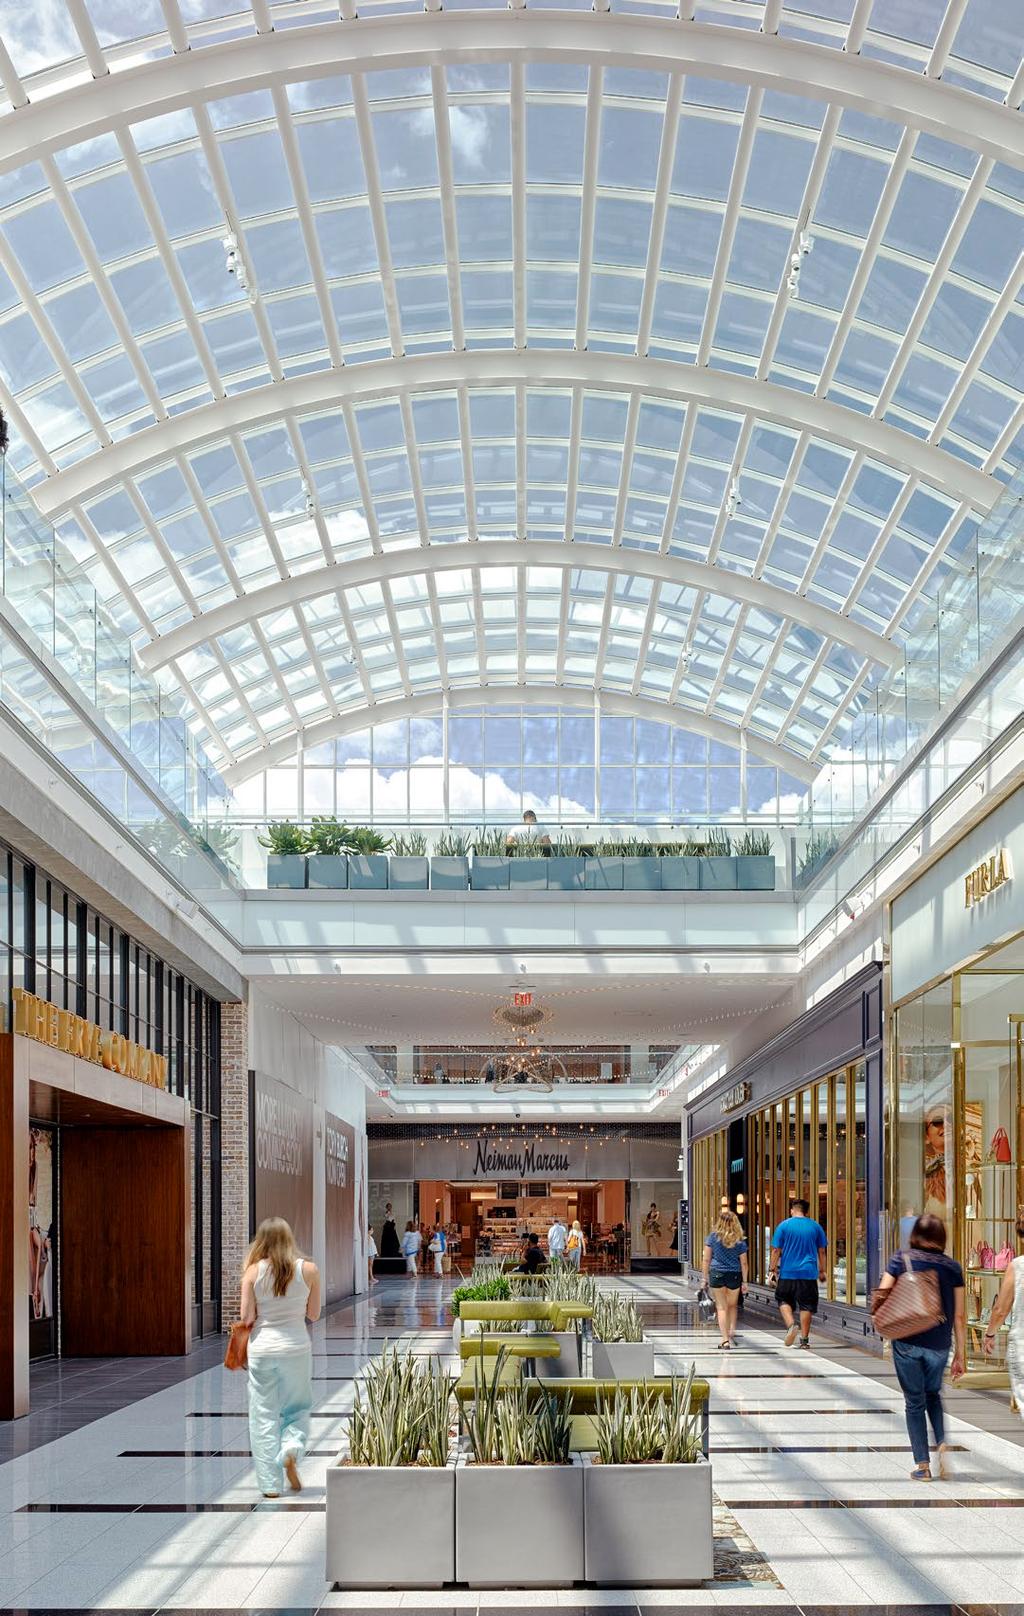 ICONIC AMERICAN SHOPPING REINVENTED Simon recently completed an extensive transformation of Roosevelt Field, one of America s most iconic shopping destinations, totaling a quarter of a billion